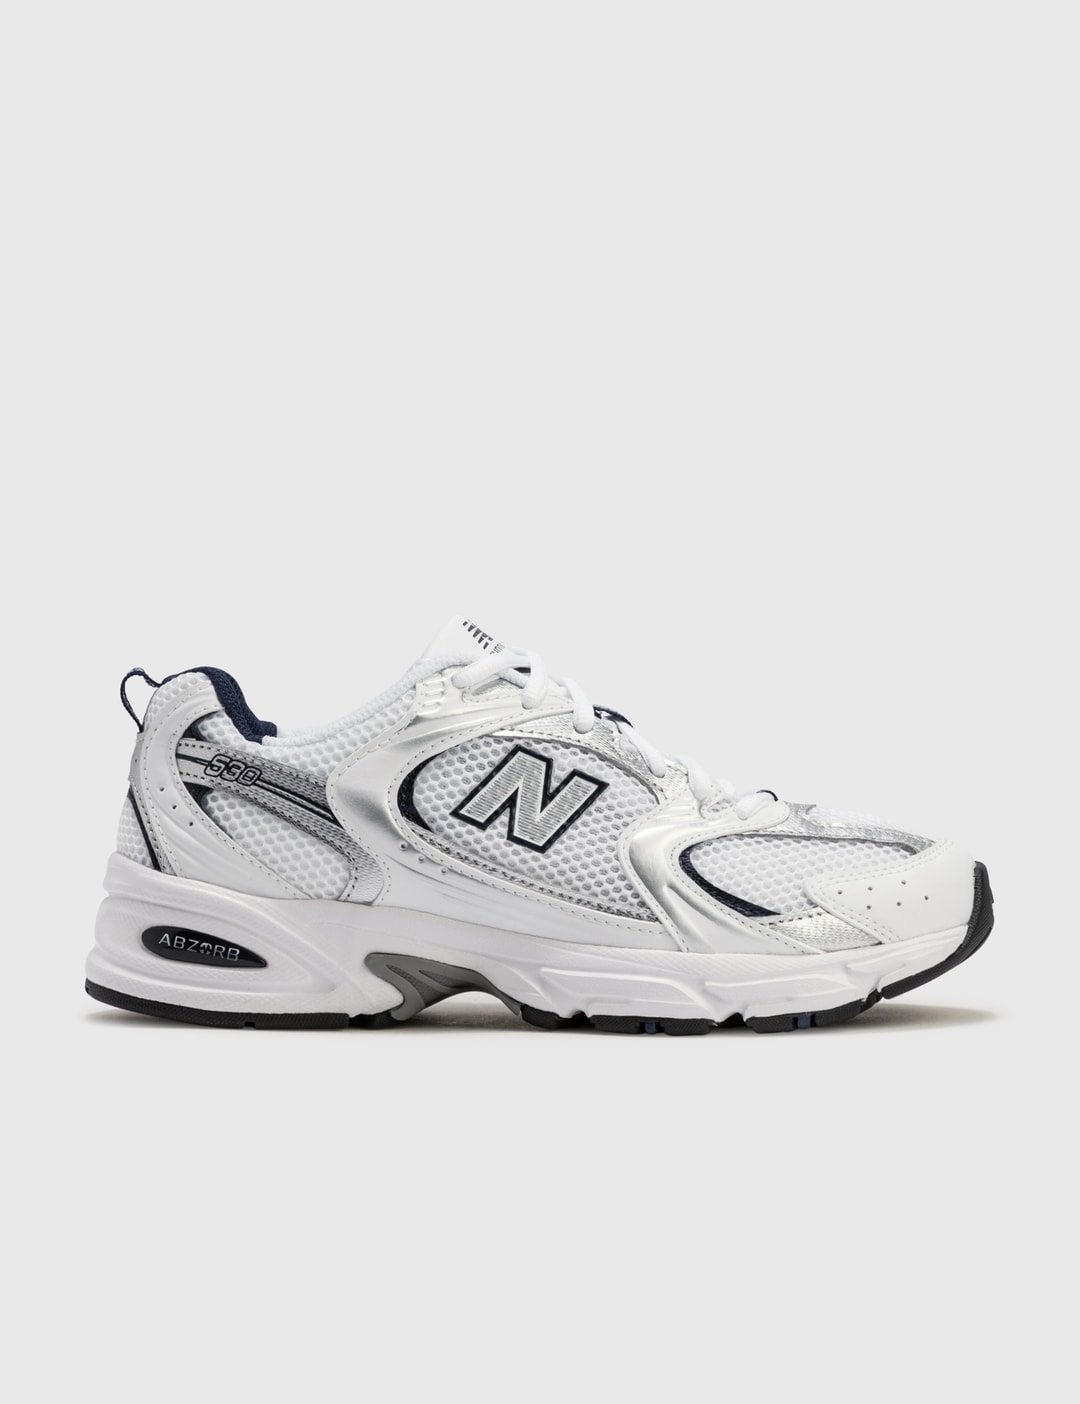 New Balance - Sneaker | HBX - Globally Curated Fashion and Lifestyle by